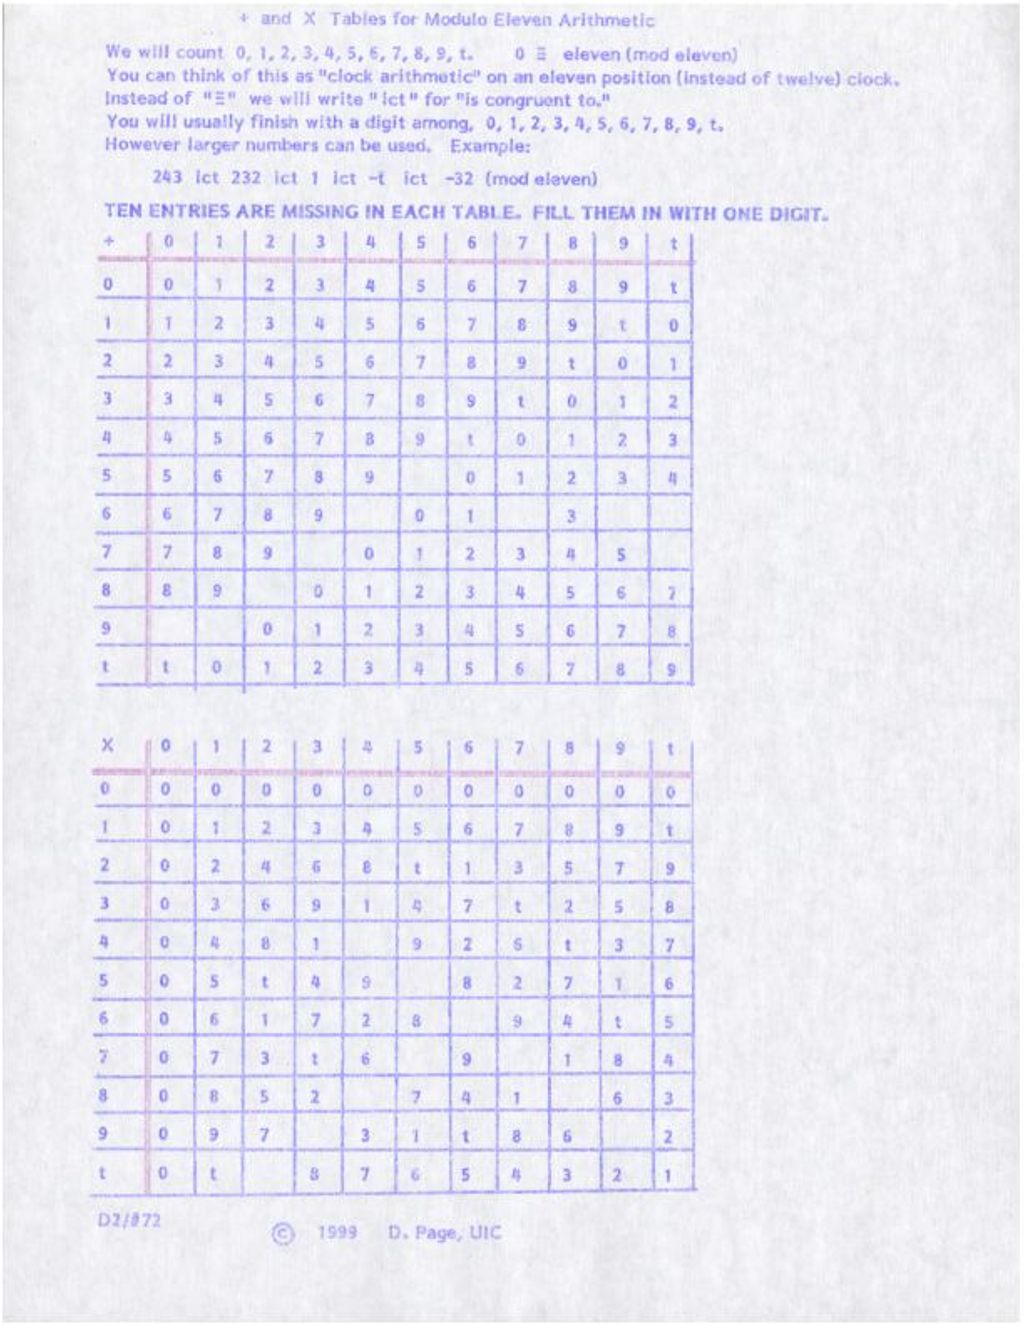 "=+ and X Tables for Modulo Eleven Arithmetic (1999)"